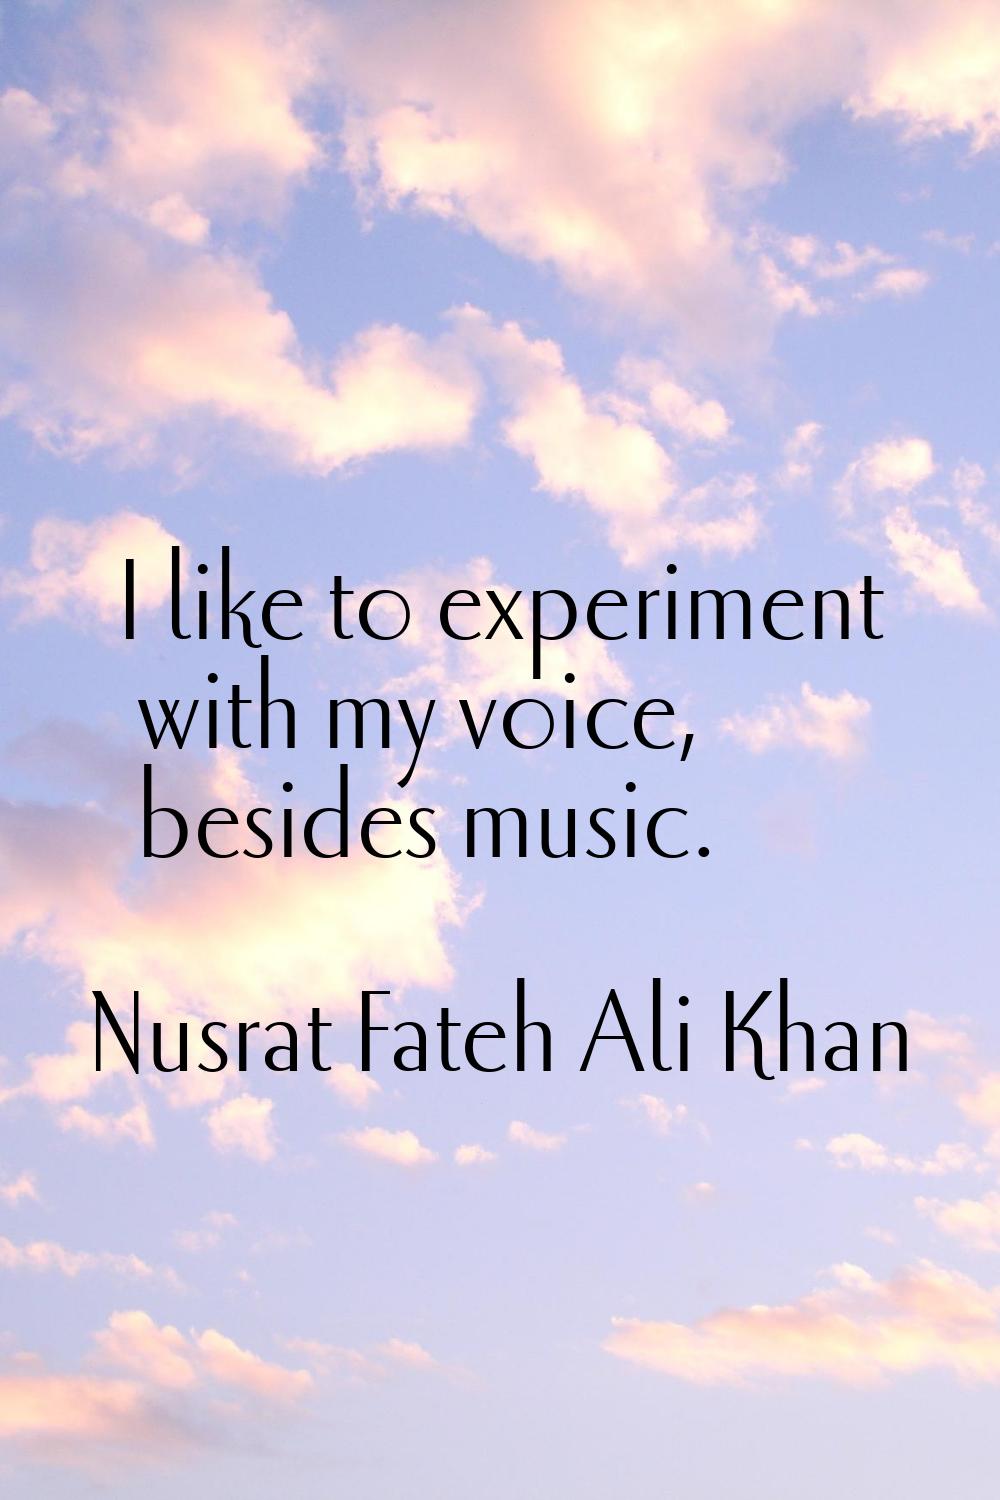 I like to experiment with my voice, besides music.